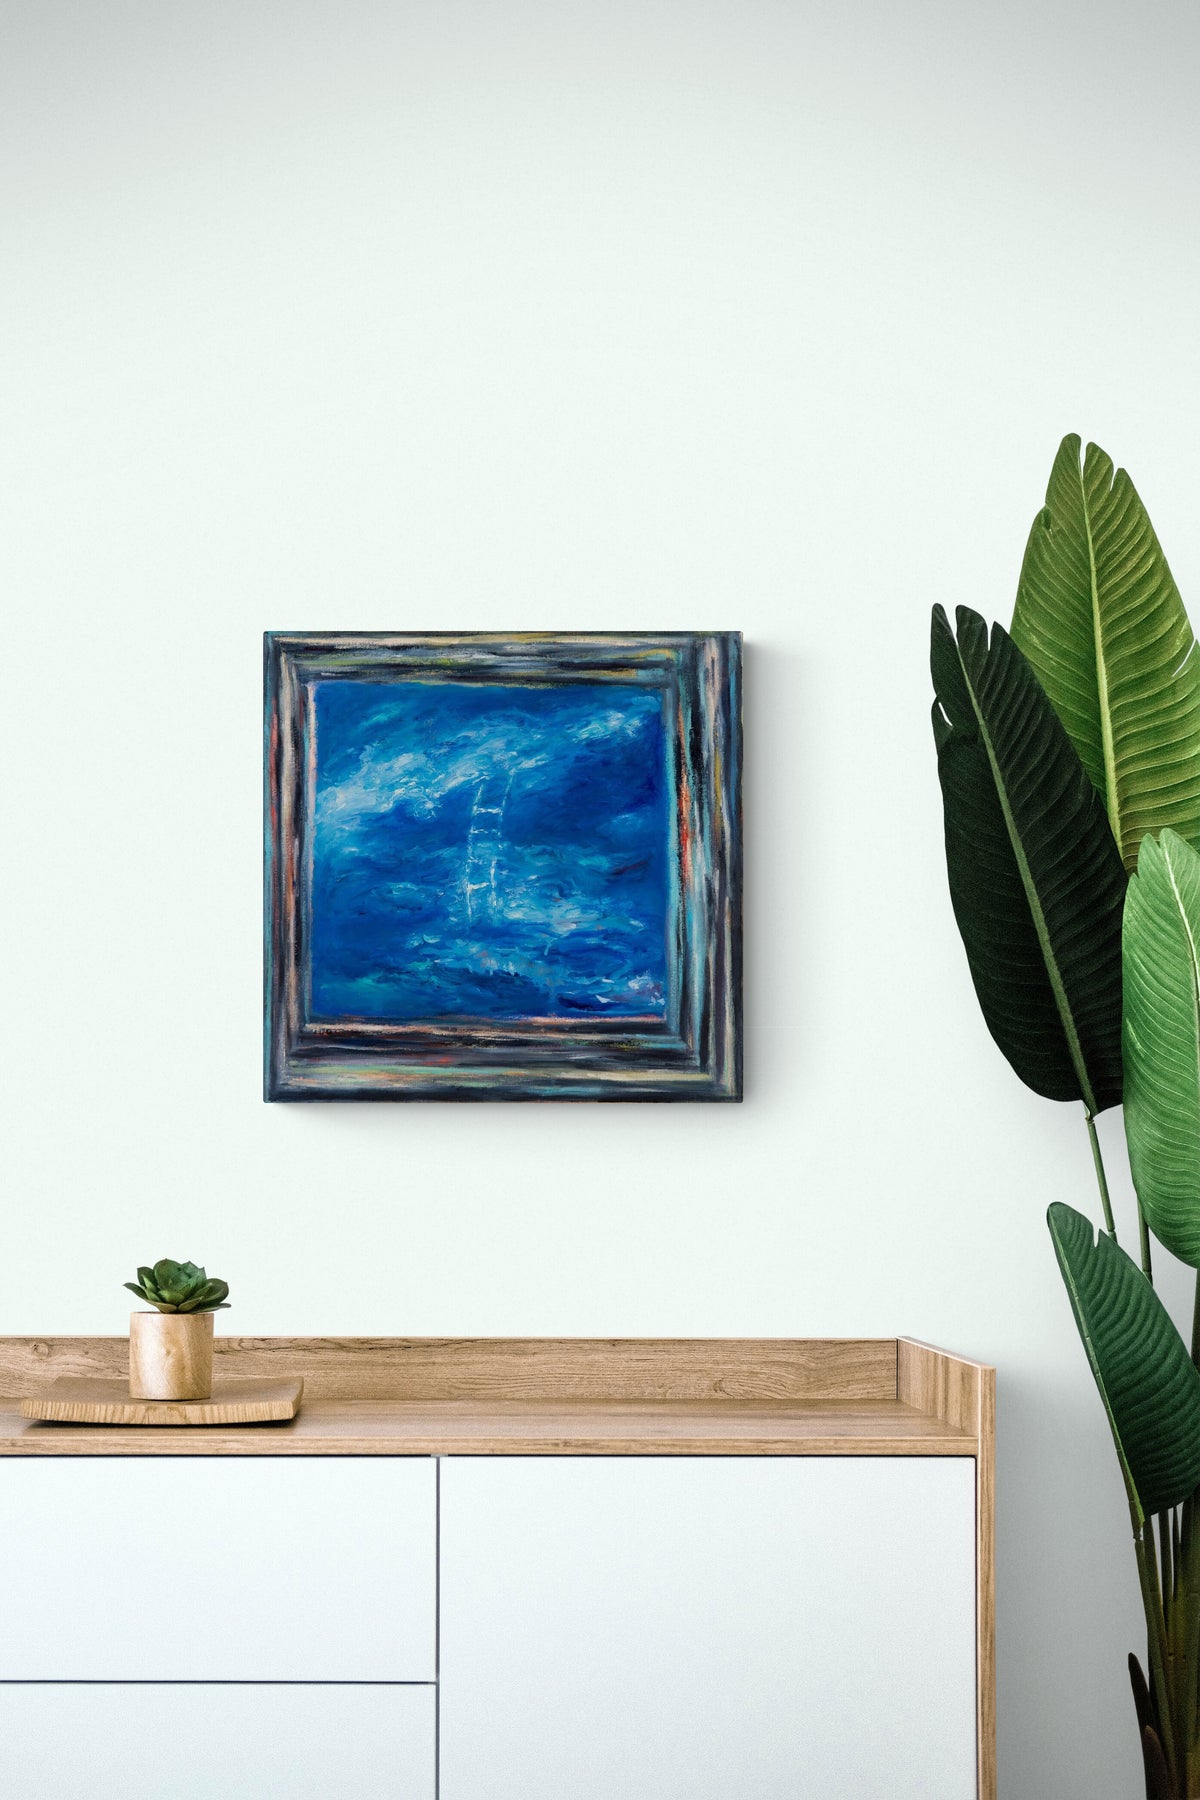 Seaside impressionistic painting brings nature & emotion in this simple natural dining room